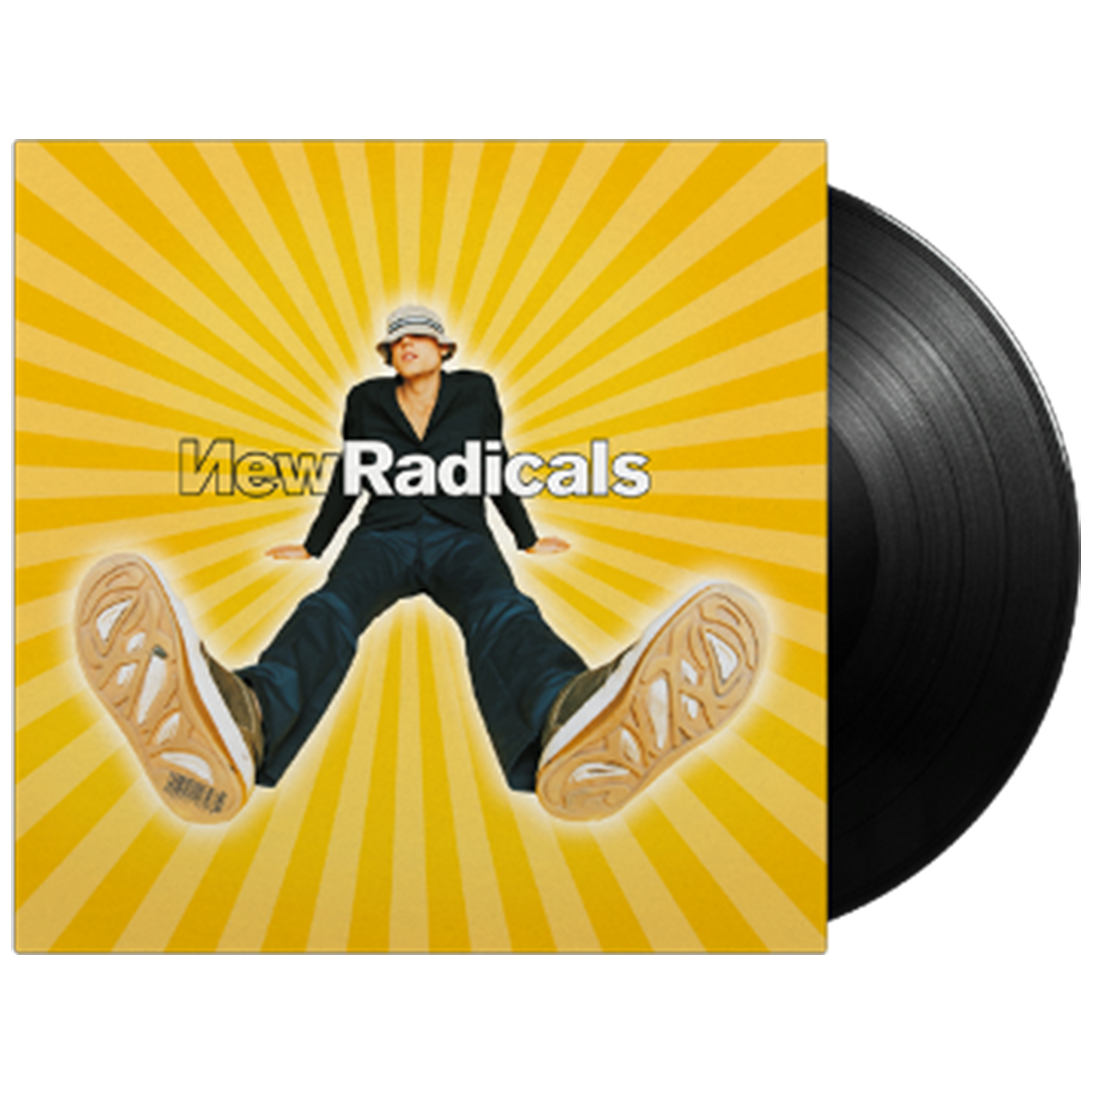 New Radicals - Maybe You've Been Brainwashed Too: Vinyl LP